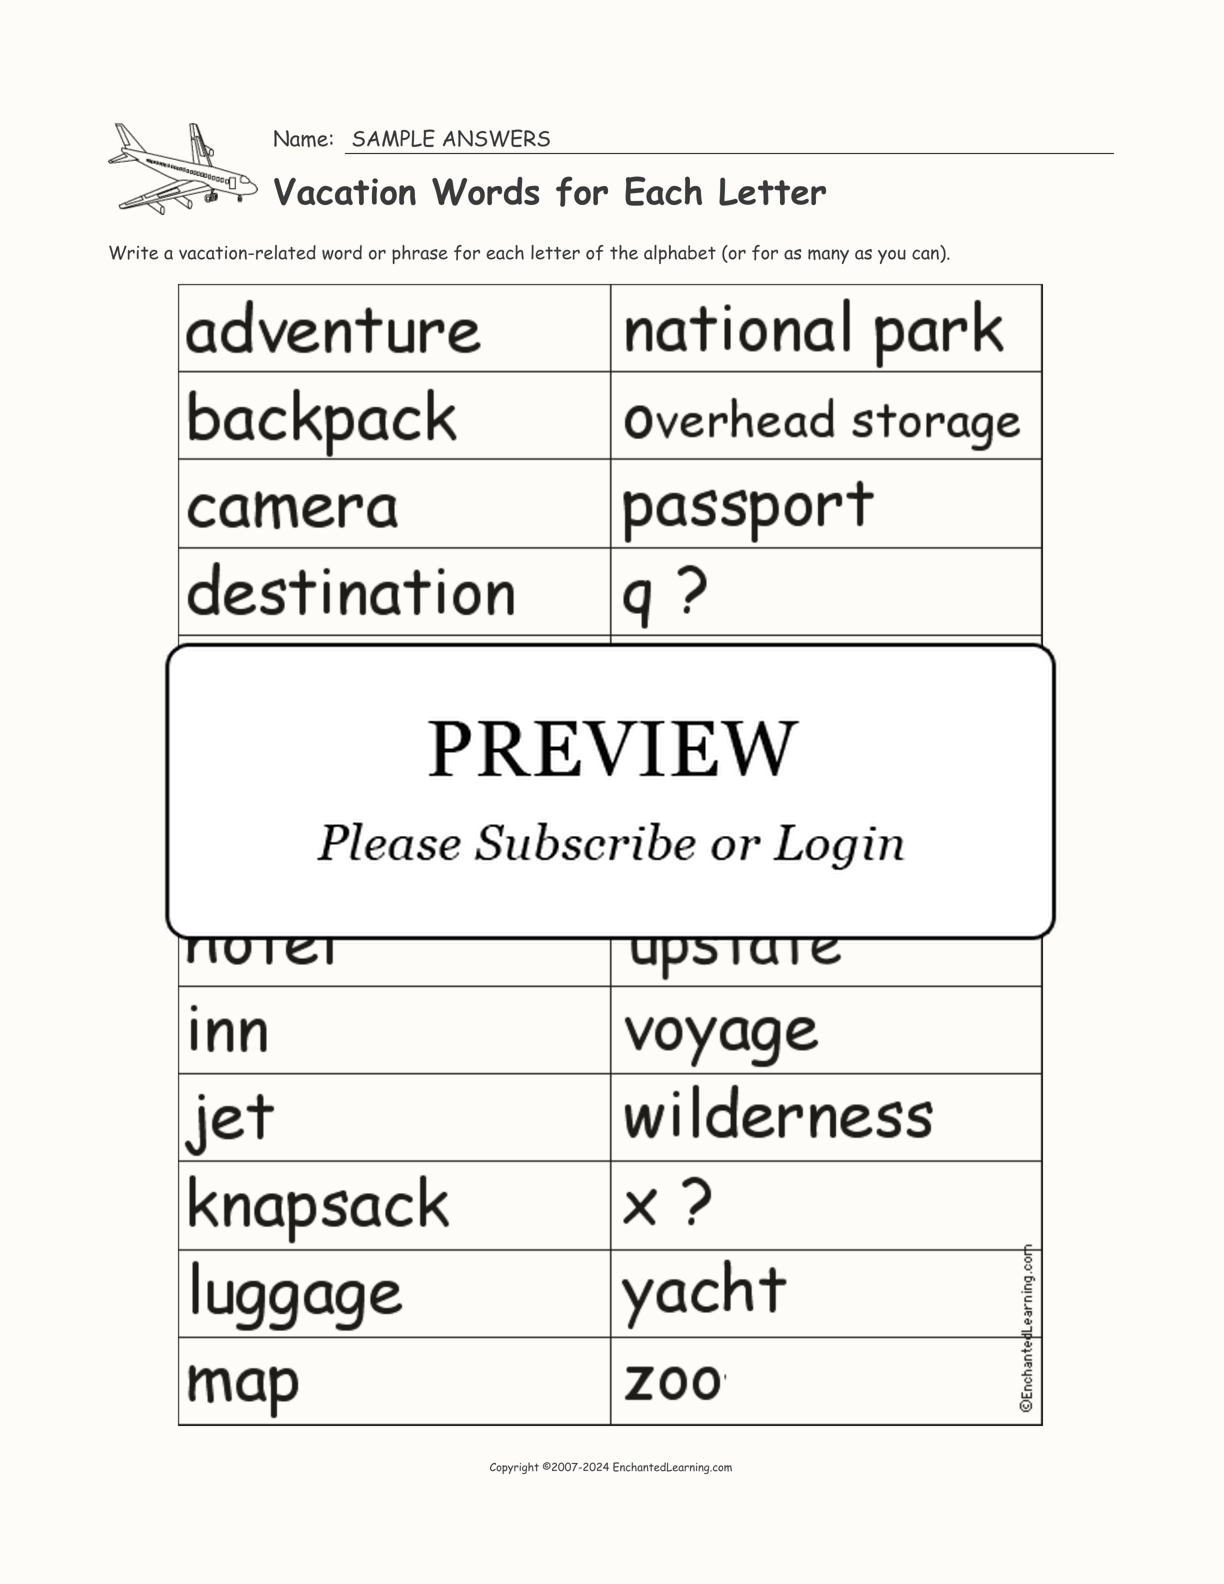 Vacation Words for Each Letter interactive worksheet page 2